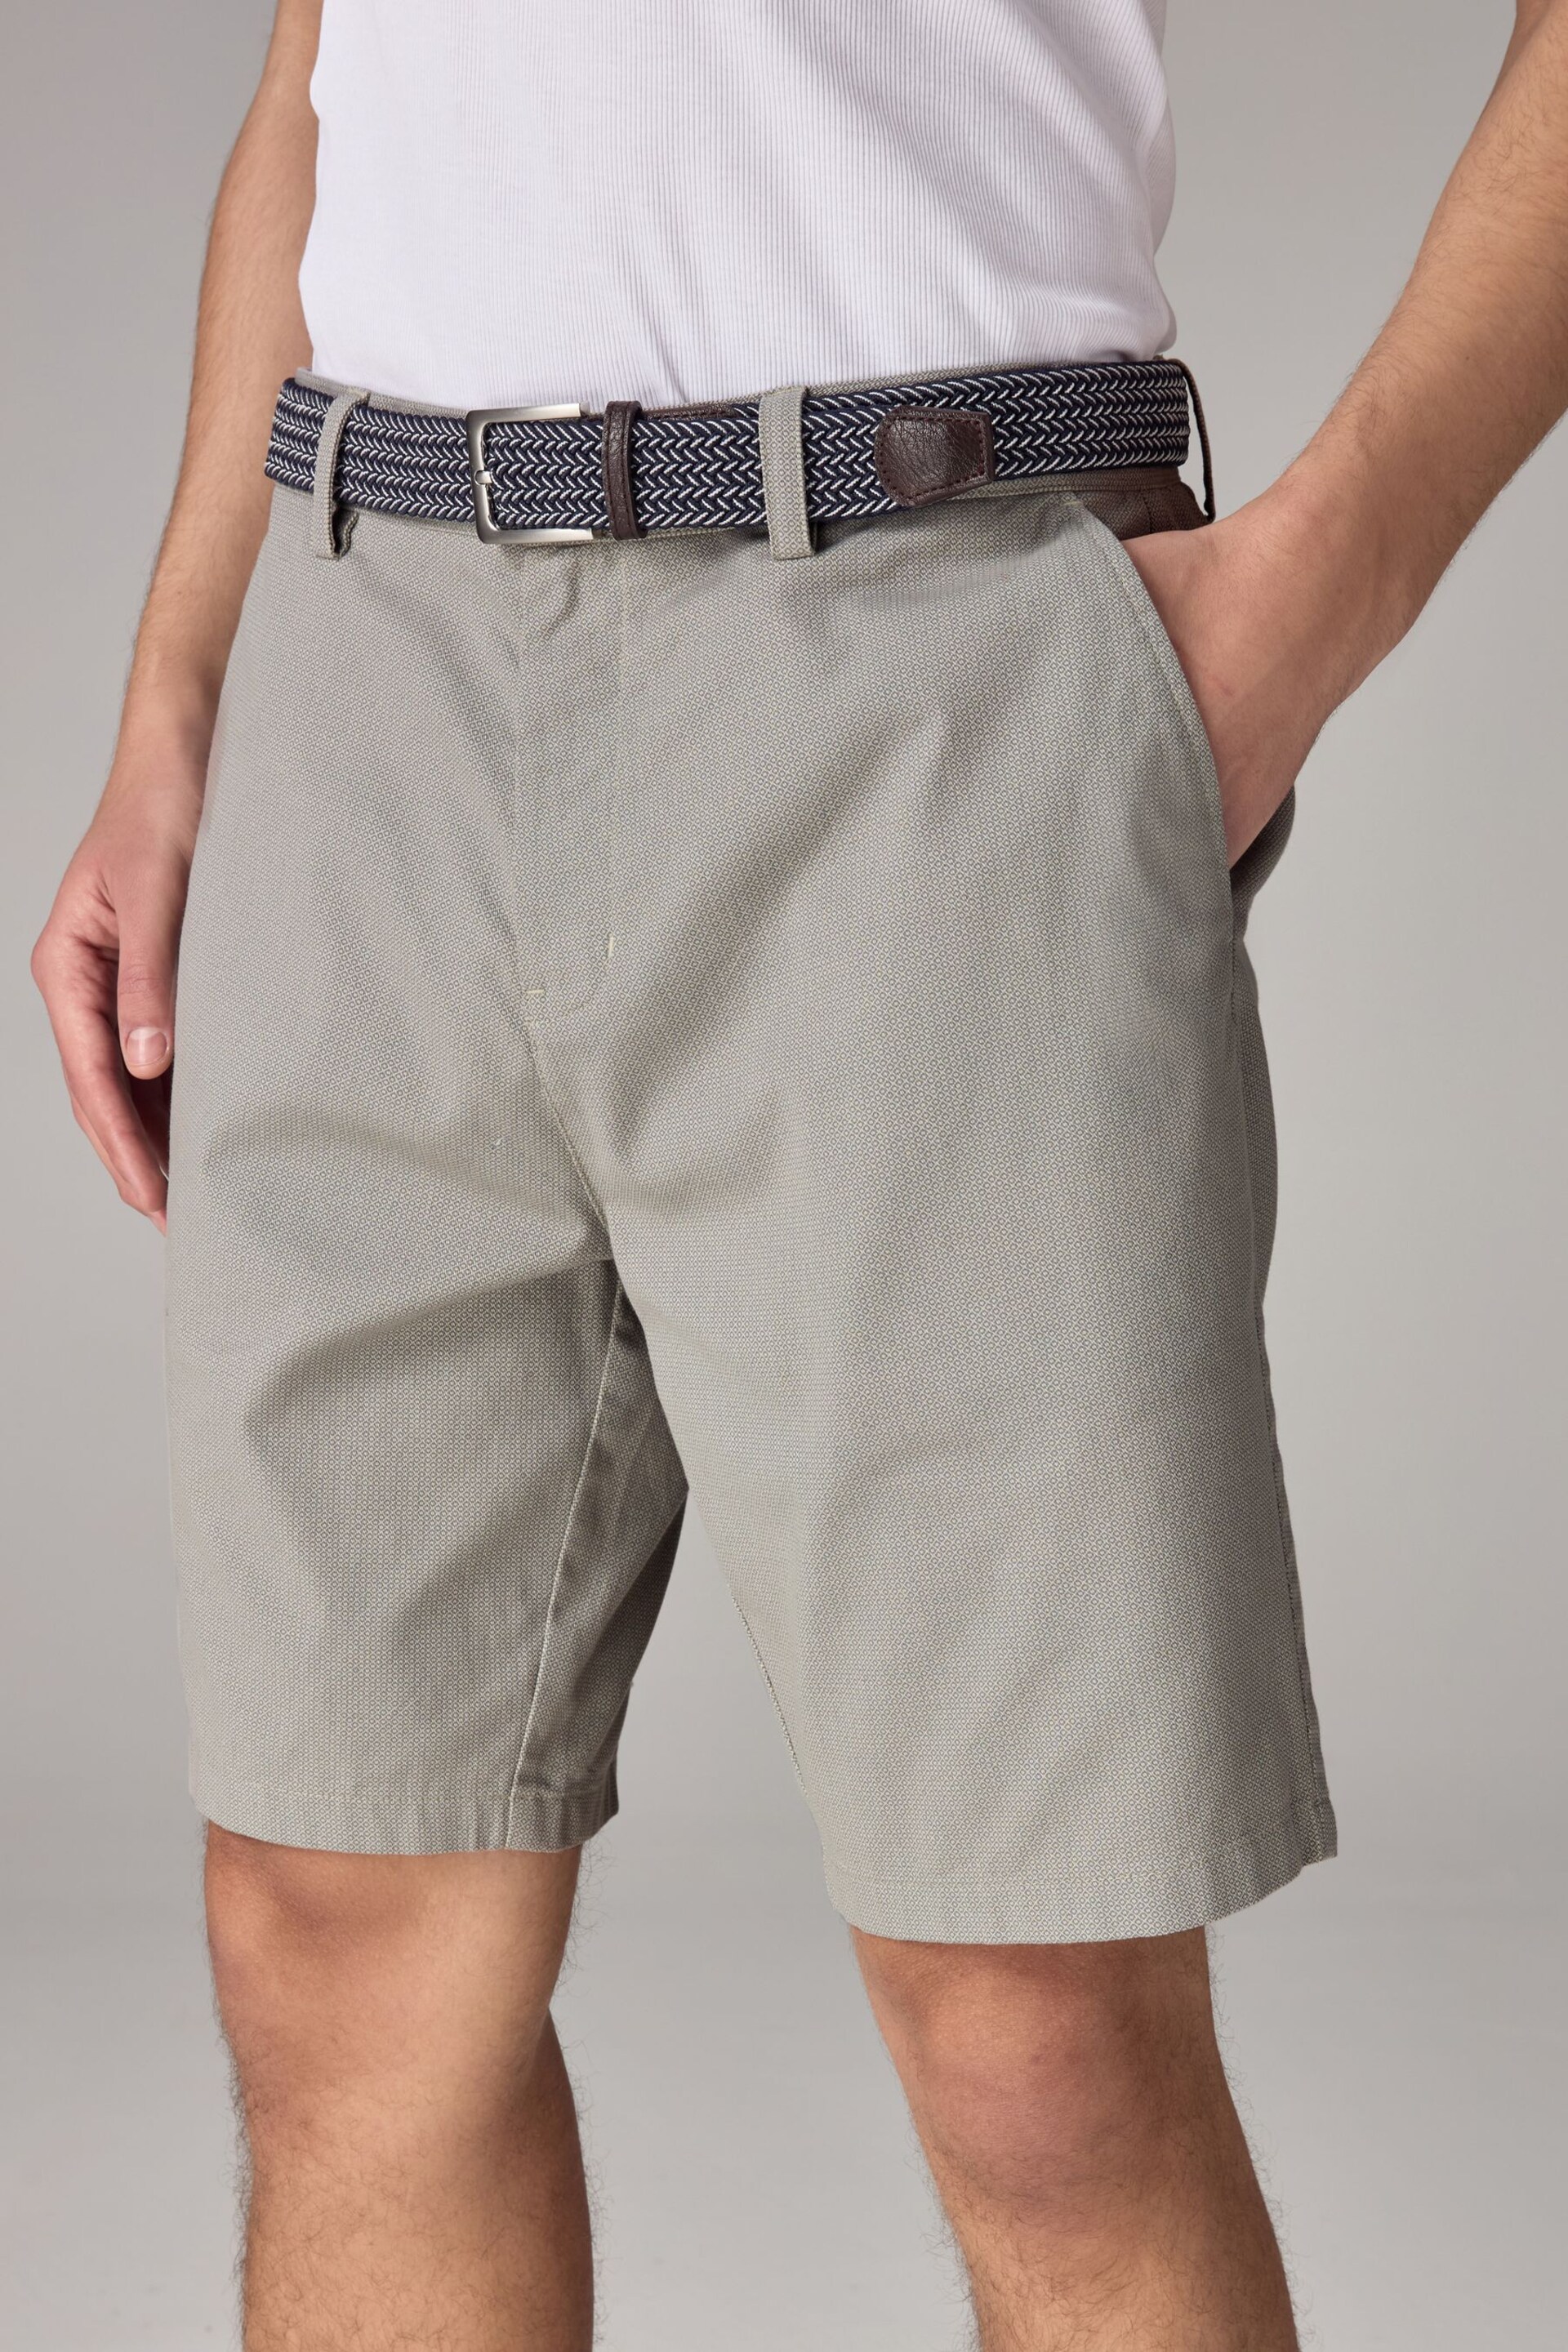 Sage Green Textured Cotton Blend Chino Shorts with Belt Included - Image 1 of 10